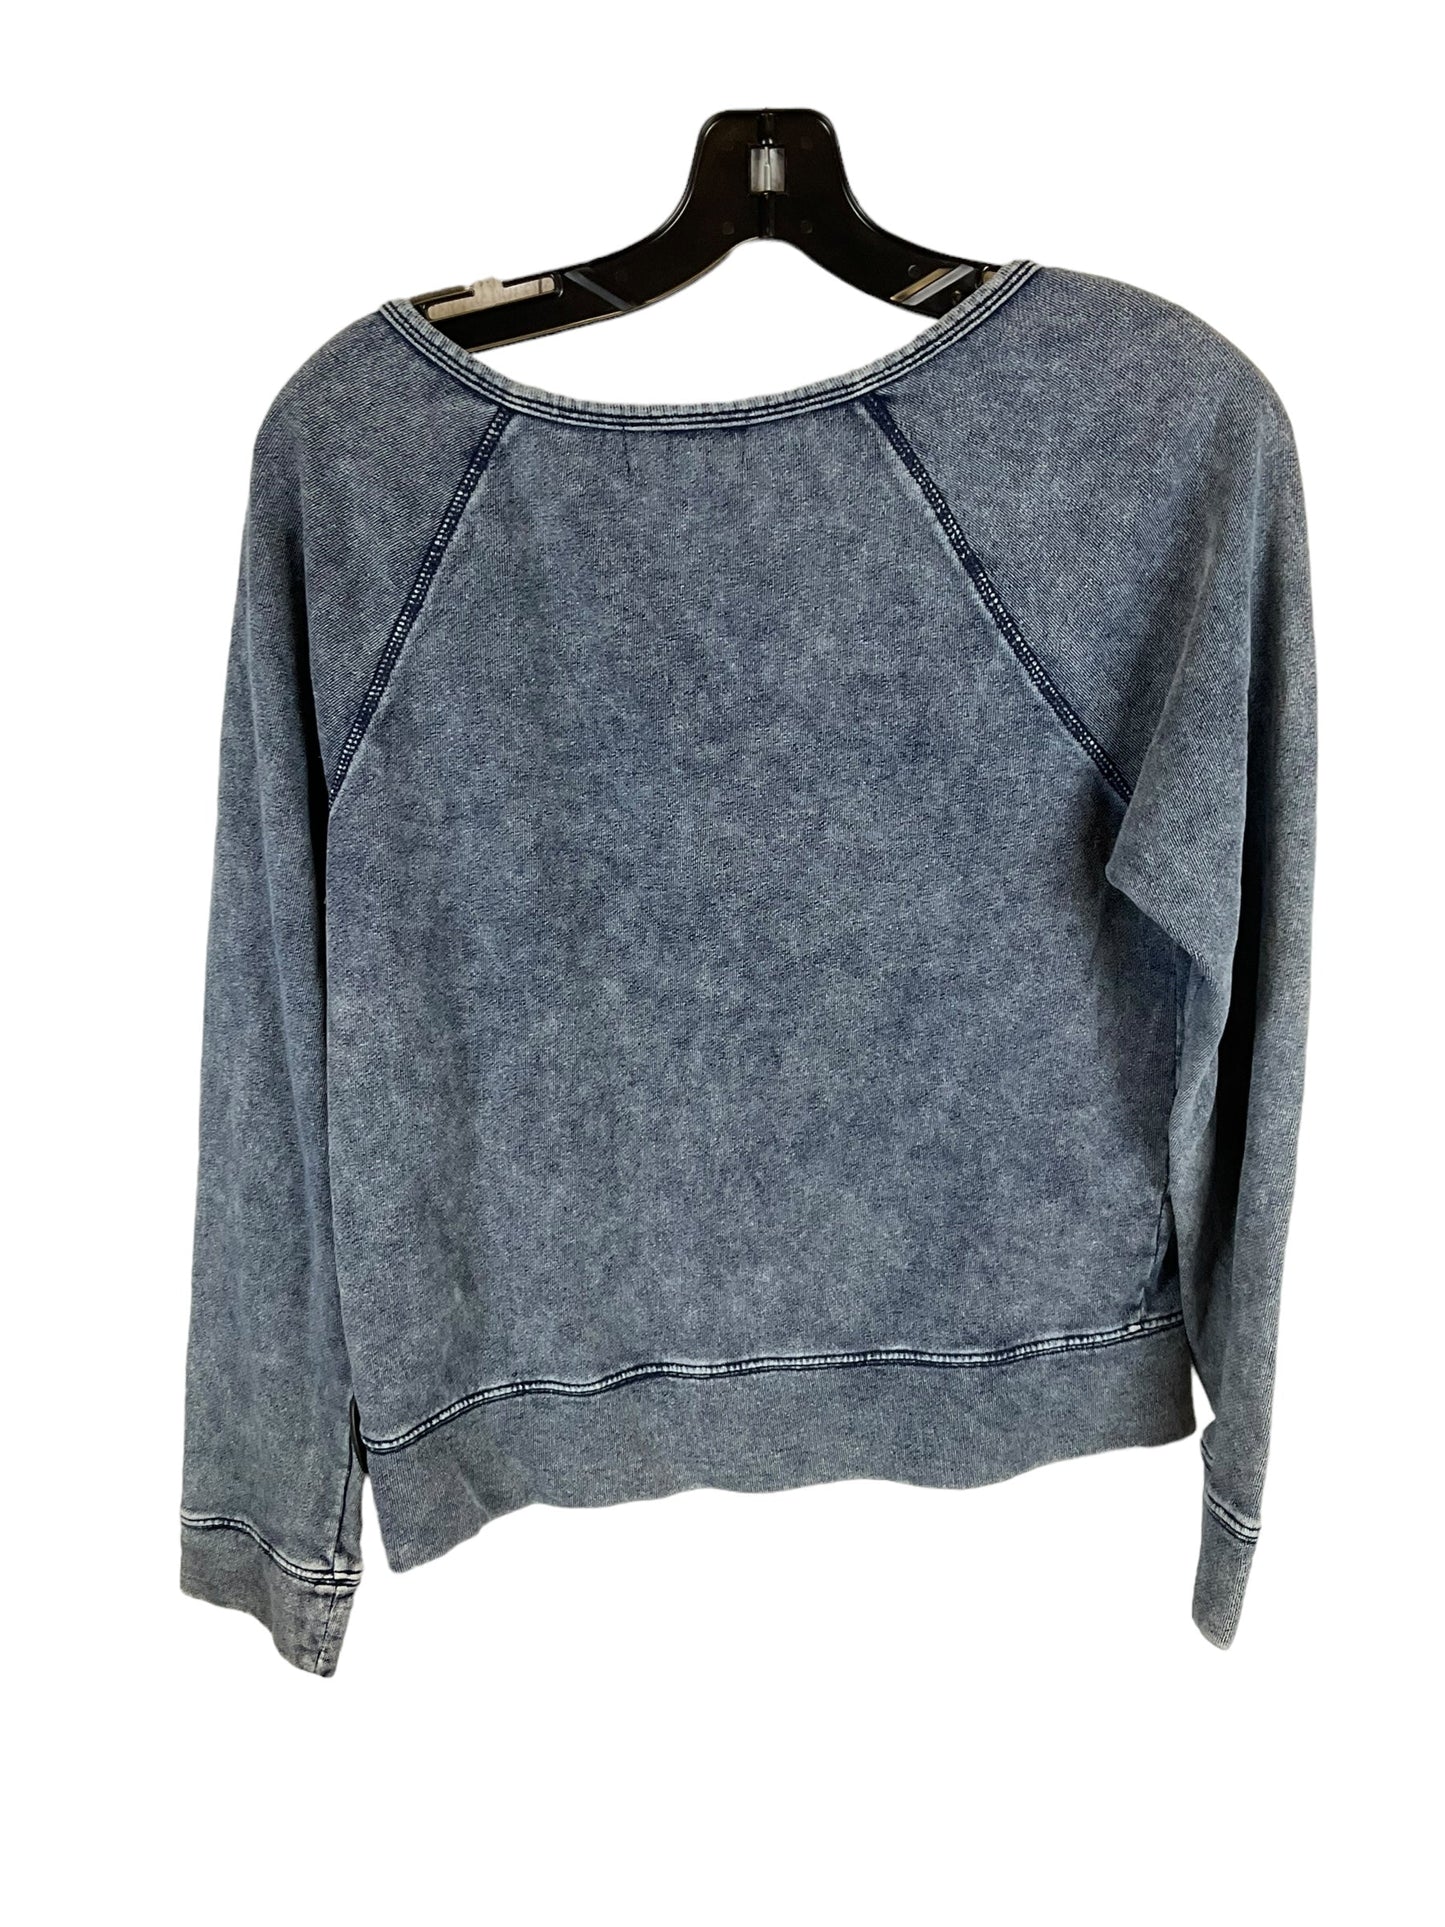 Blue Top Long Sleeve Cloth & Stone, Size S